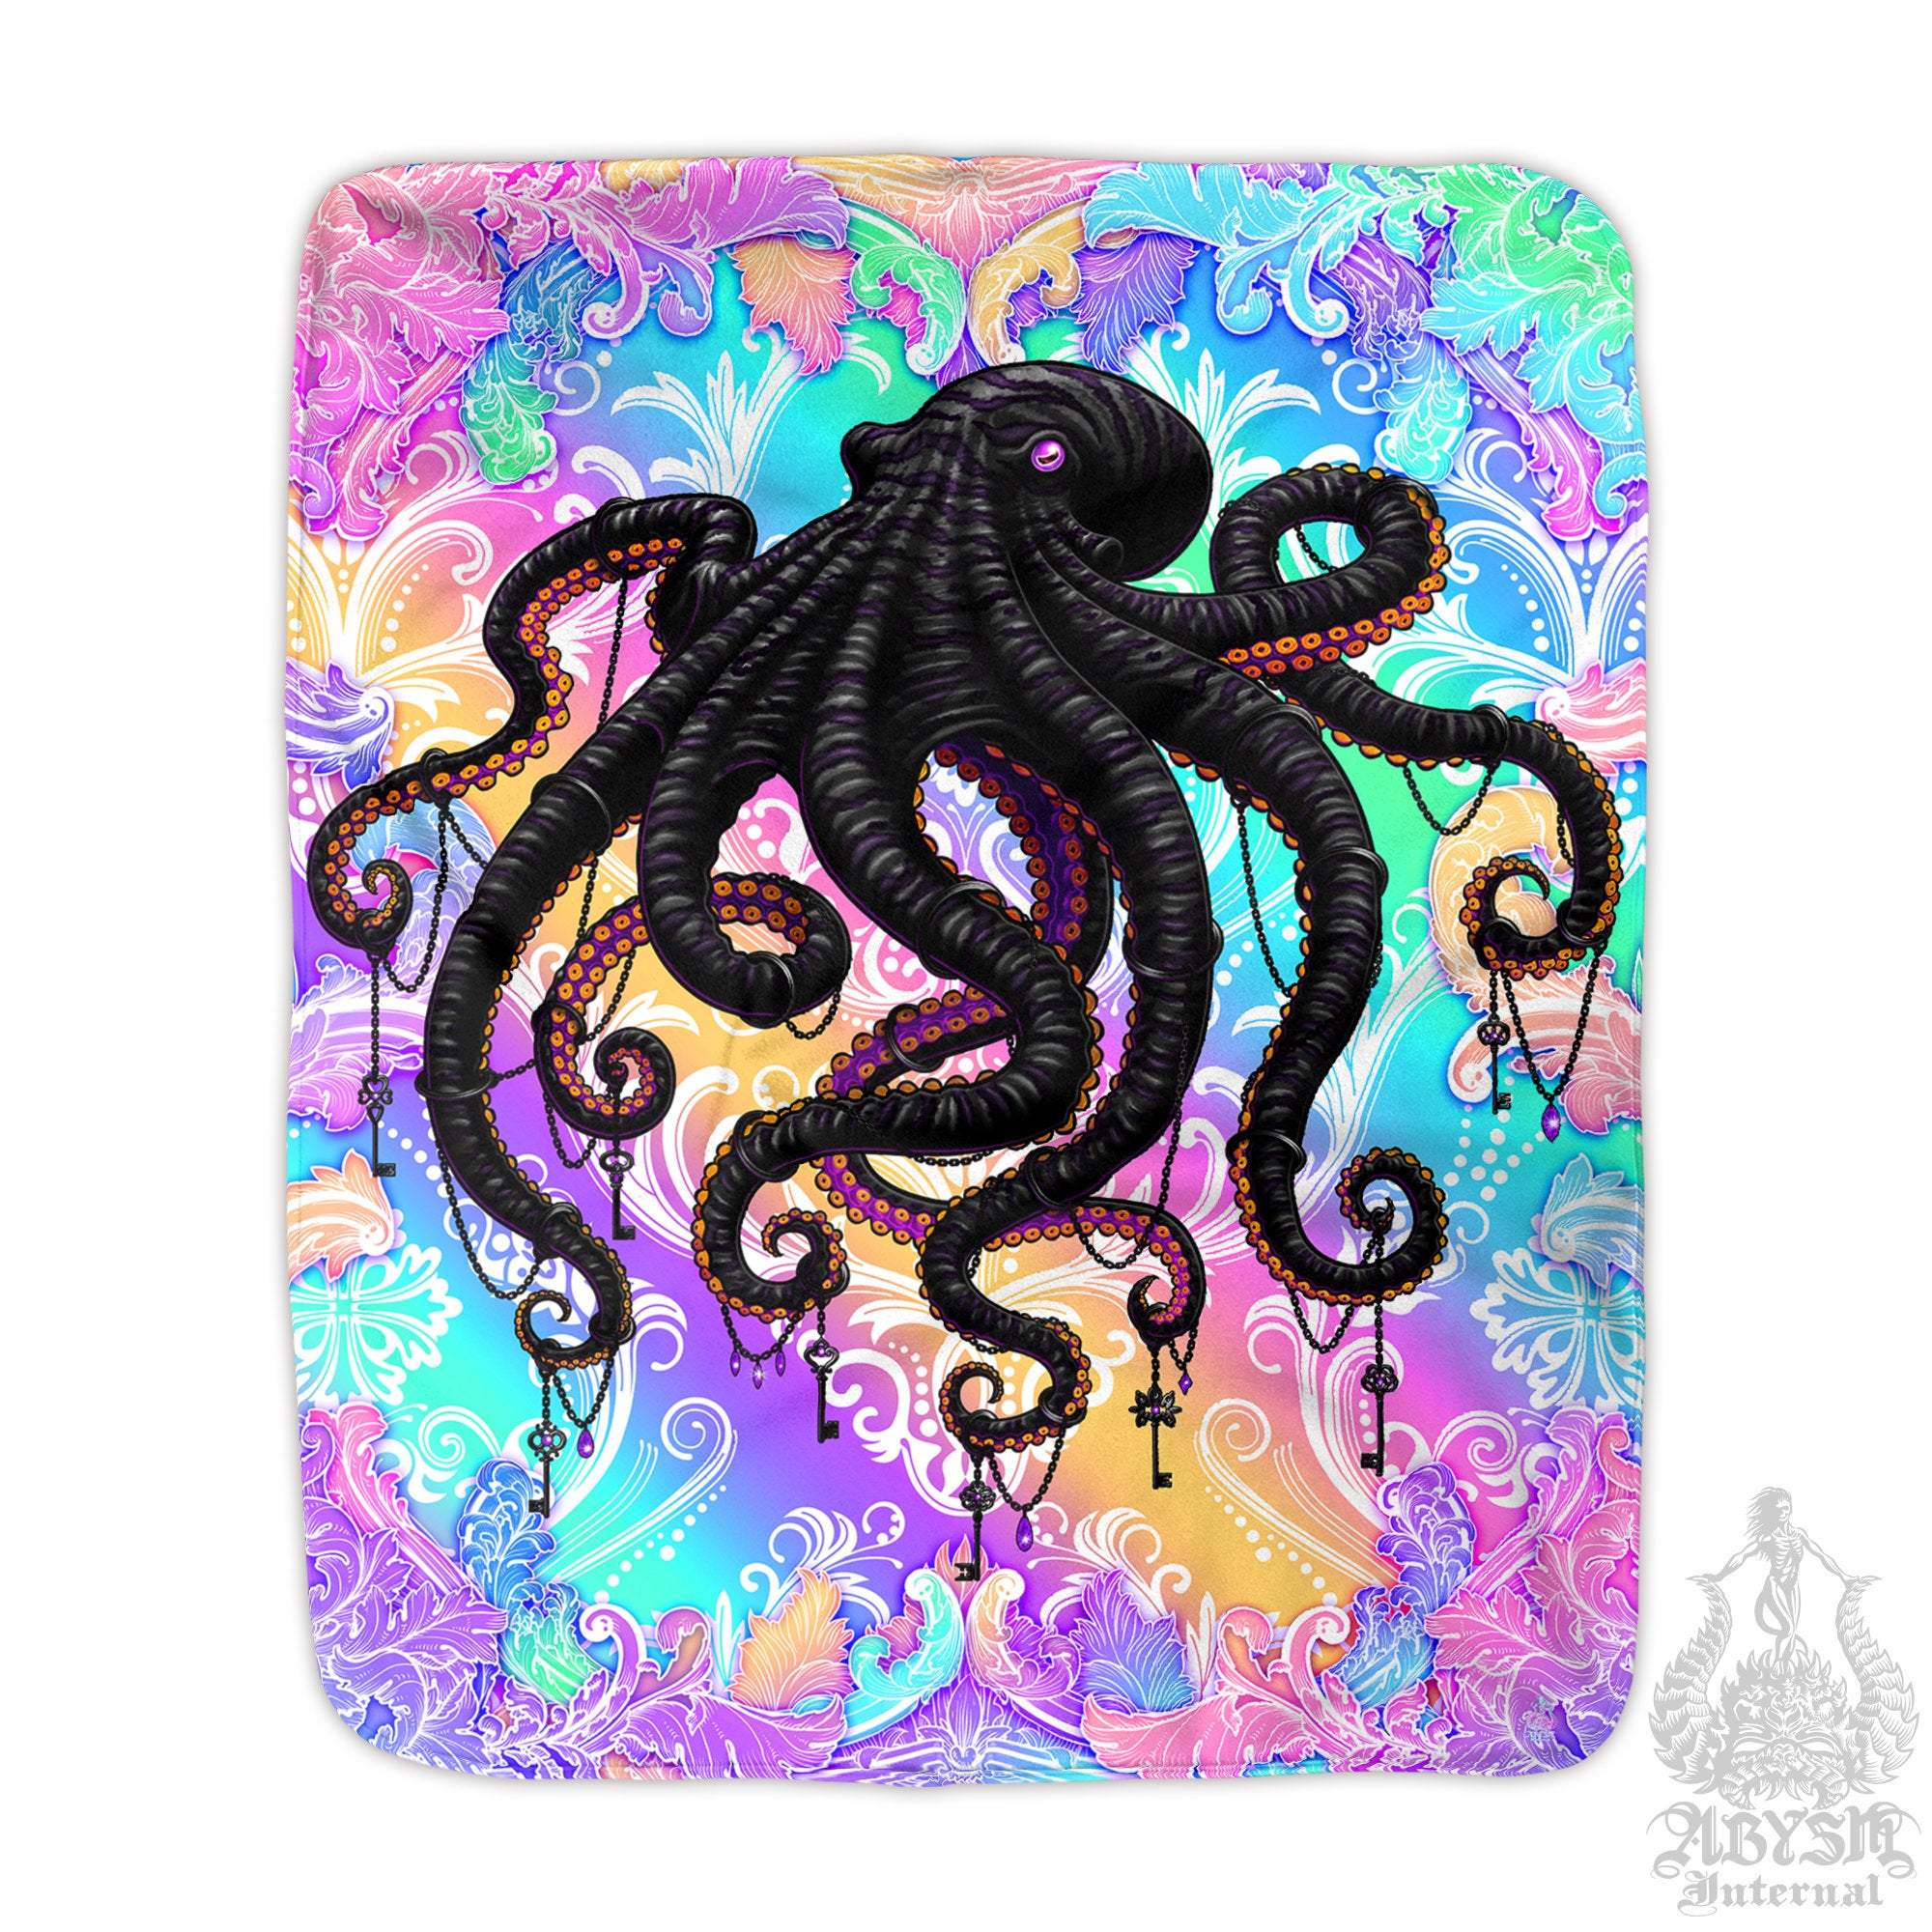 Octopus Throw Fleece Blanket, Psychedelic Gift, Yume Kawaii, Fairy Kei Decor, Eclectic and Funky Gift - Pastel Punk Black - Abysm Internal